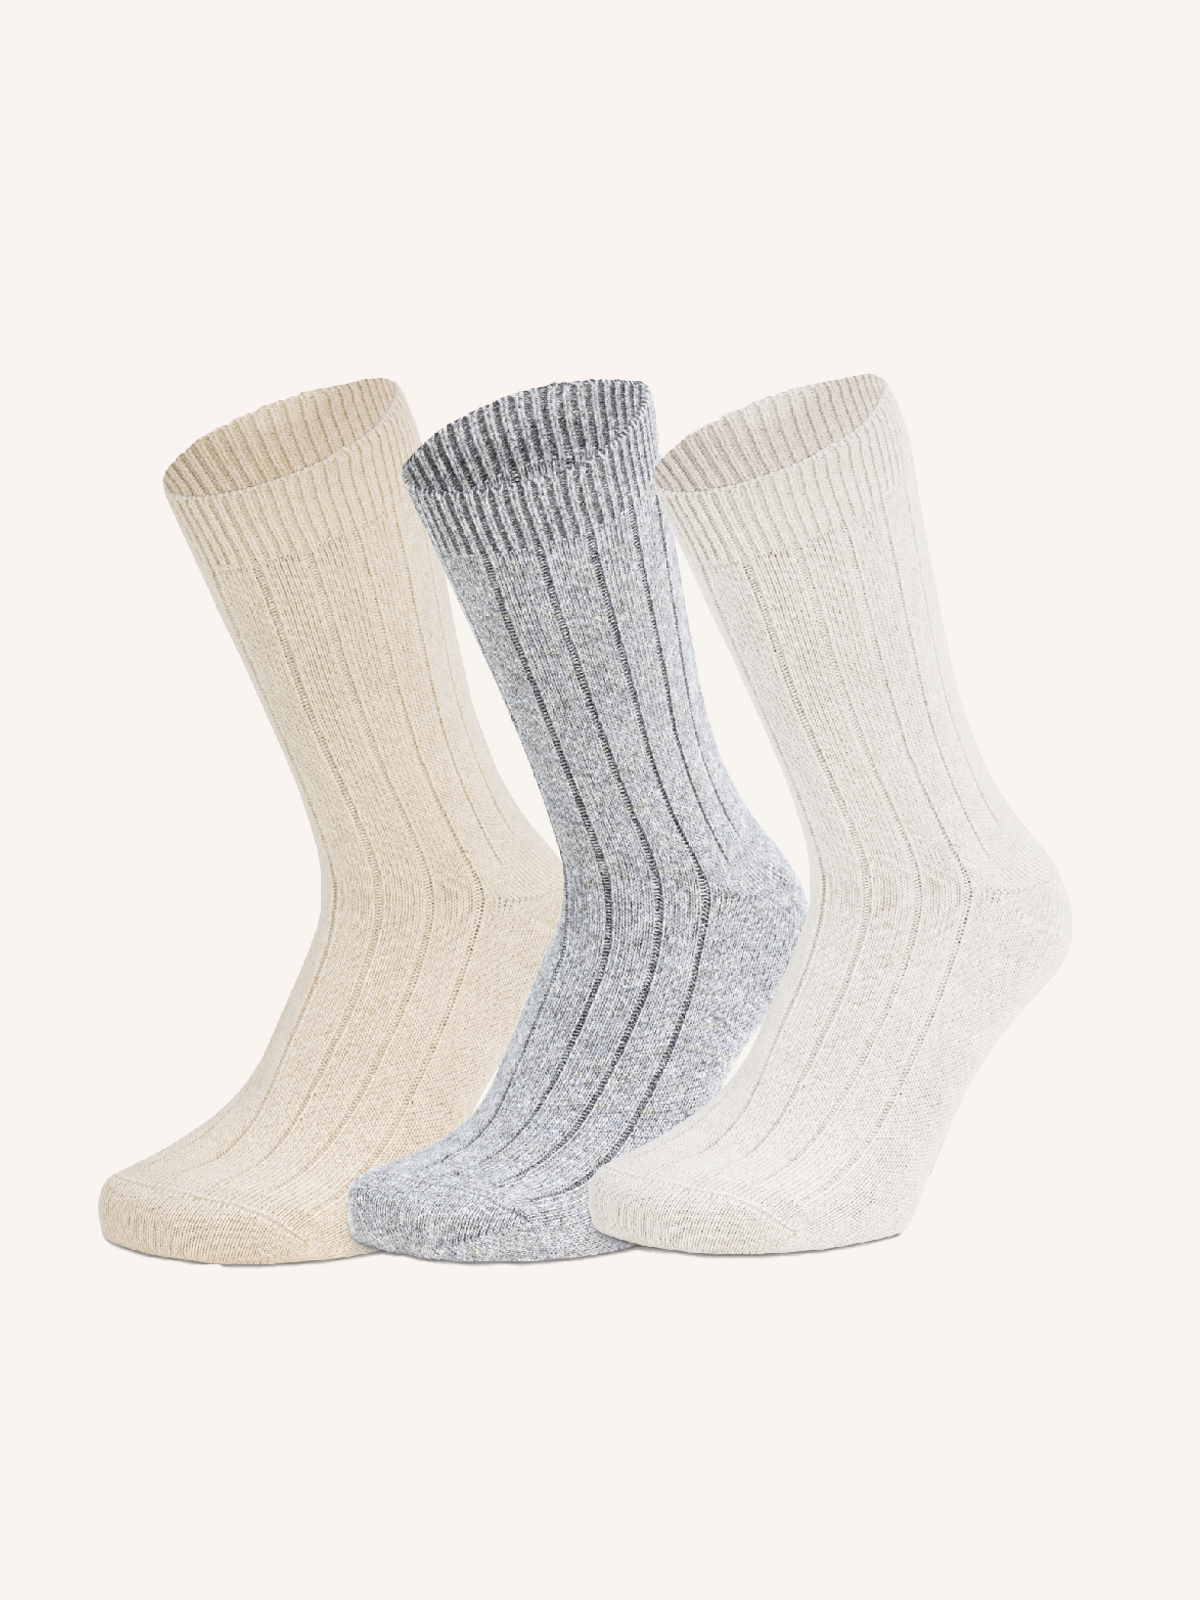 Short Socks in Angora, Cotton and Viscose for Women | Plain Color | Pack of 3 Pairs | Angorella